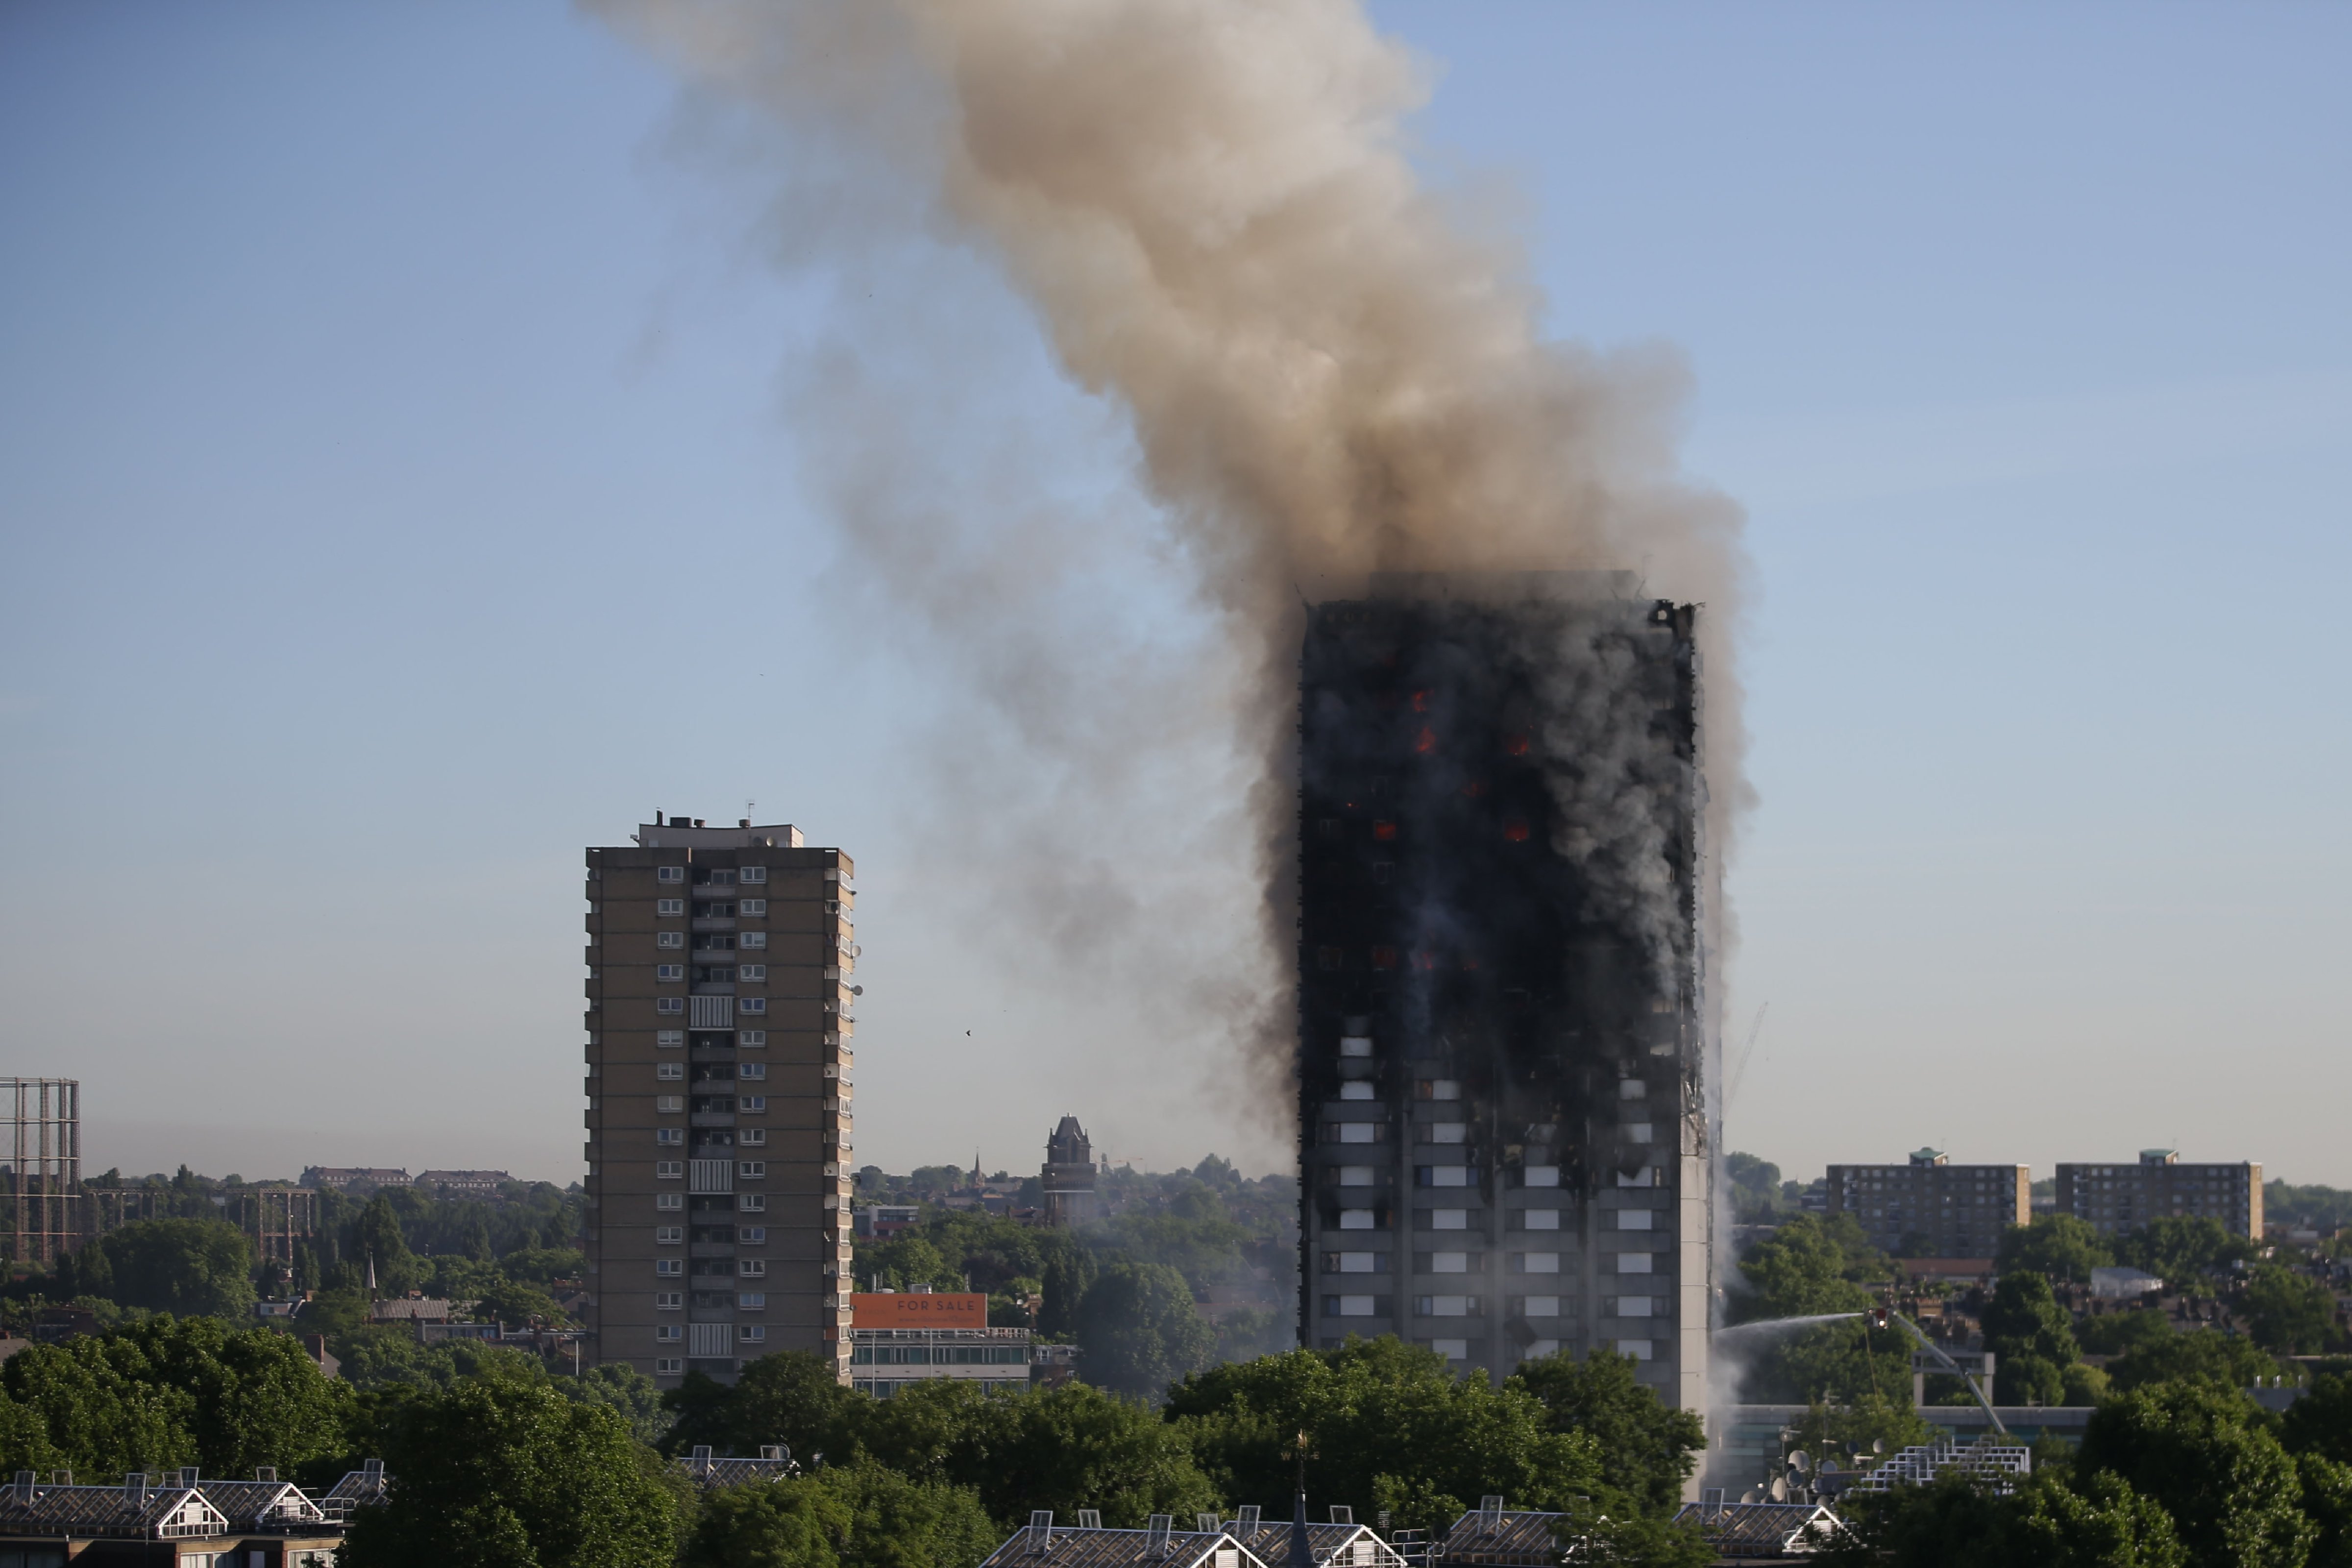 Smoke billows from Grenfell Tower as firefighters attempt to control a huge blaze  in London on June 14, 2017. (Daniel Leal—AFP/Getty Images)